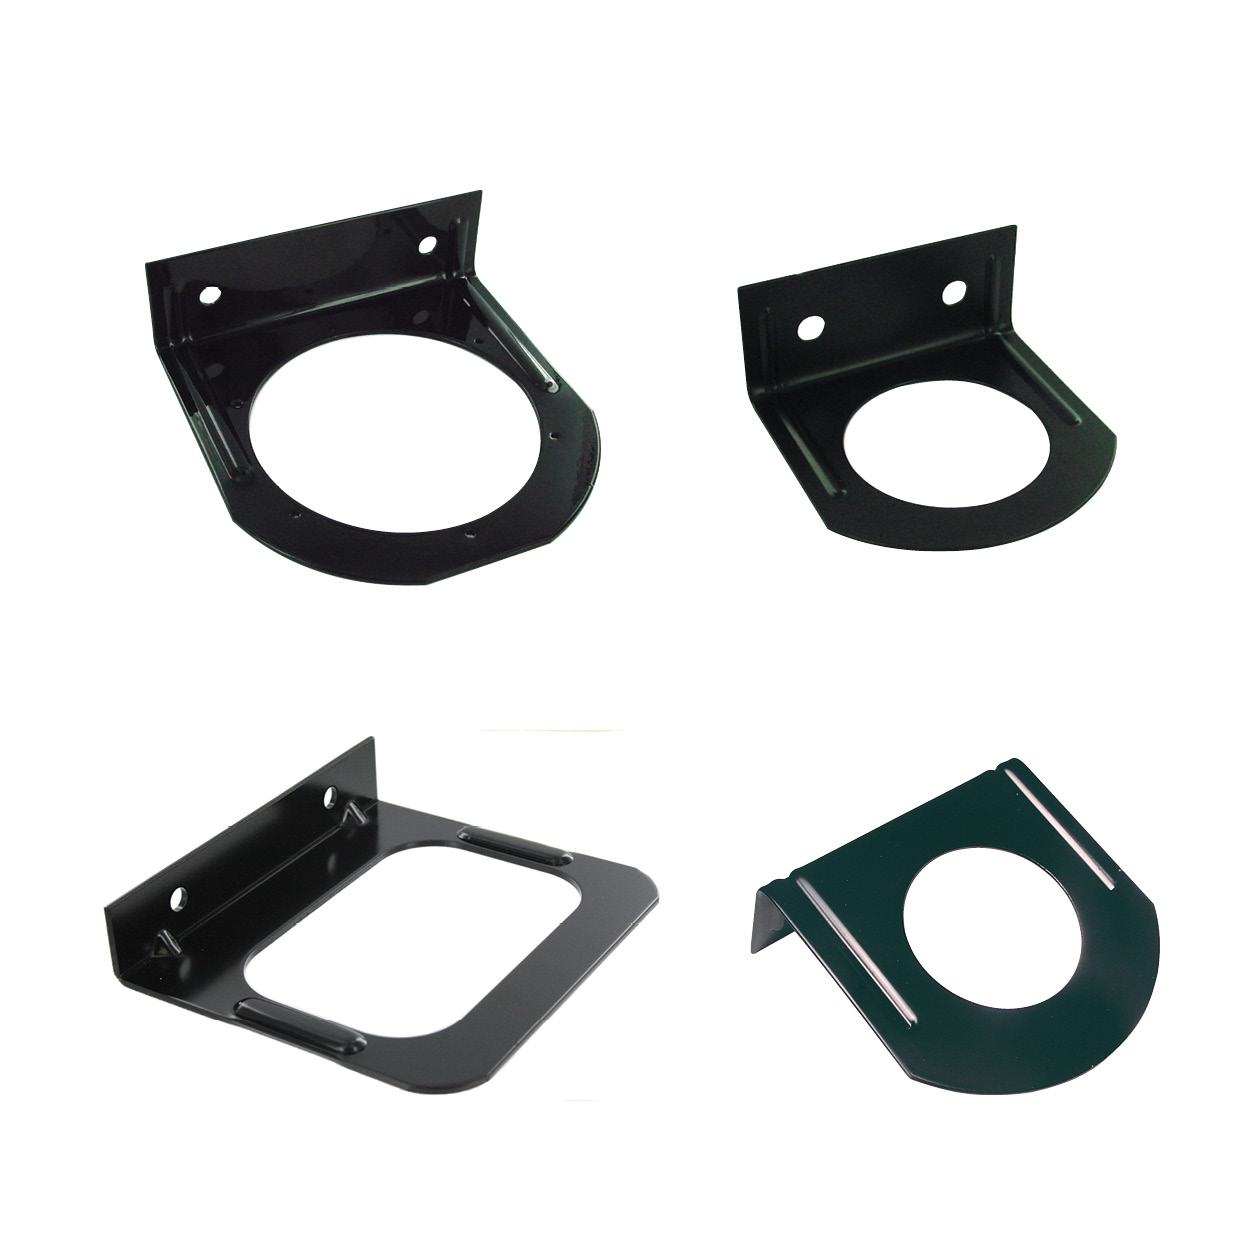 Mounting Brackets - Lighting and Safety Equipment - Products